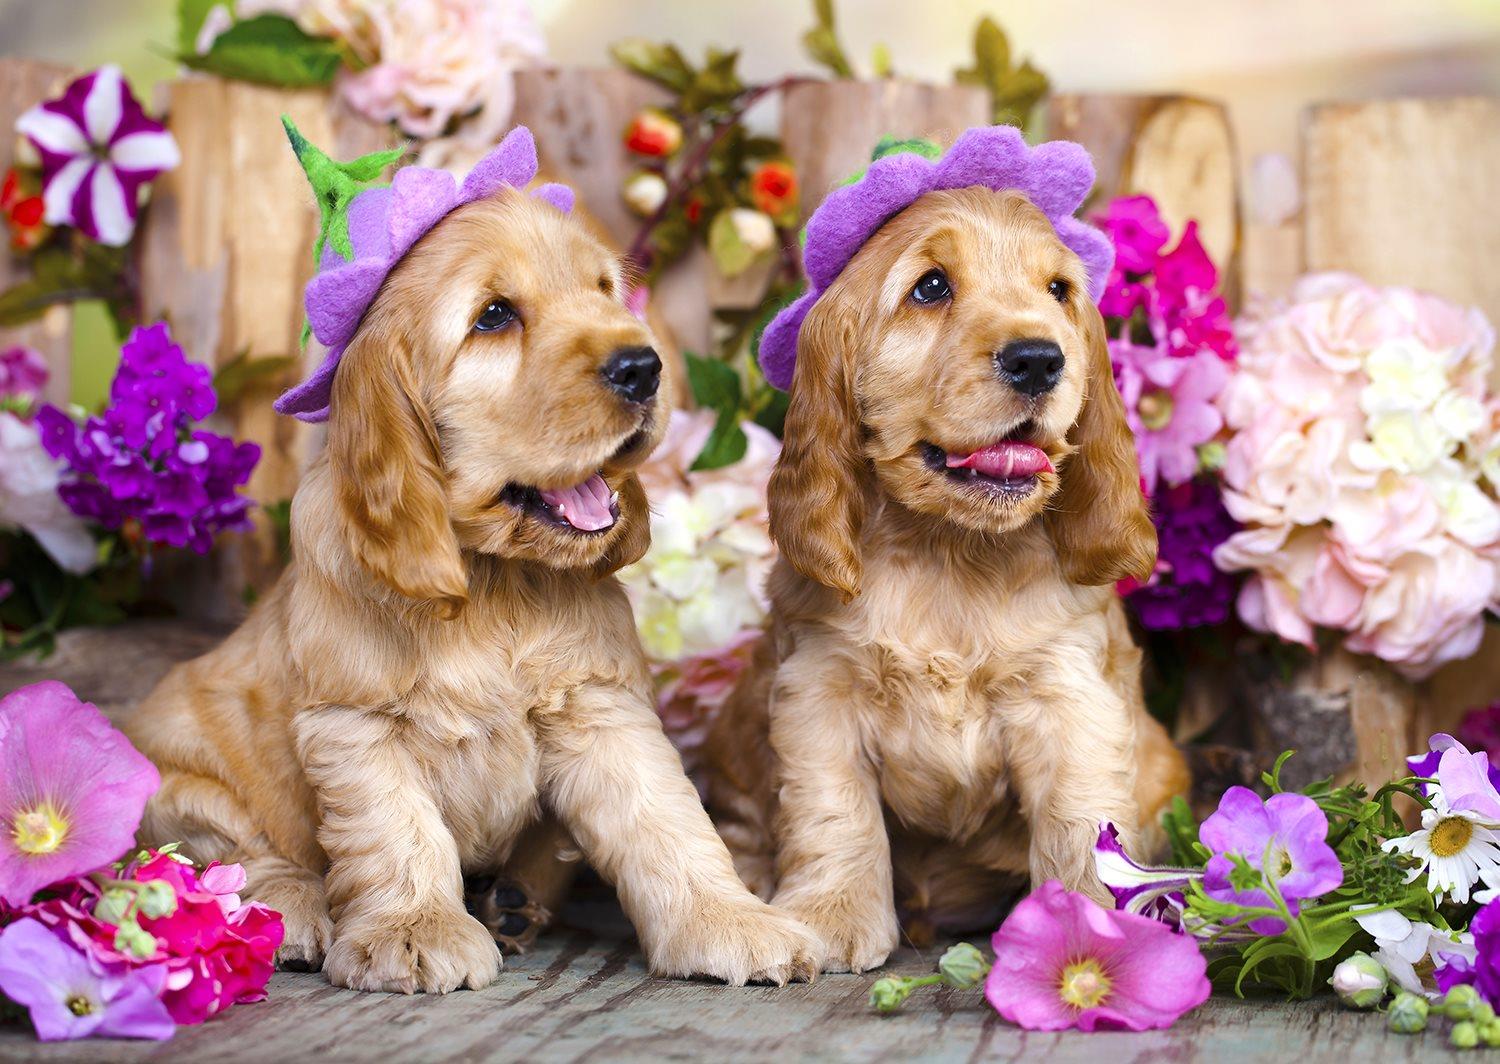 Enjoy Spaniel Puppies with Flower Hats Jigsaw Puzzle (1000 Pieces)